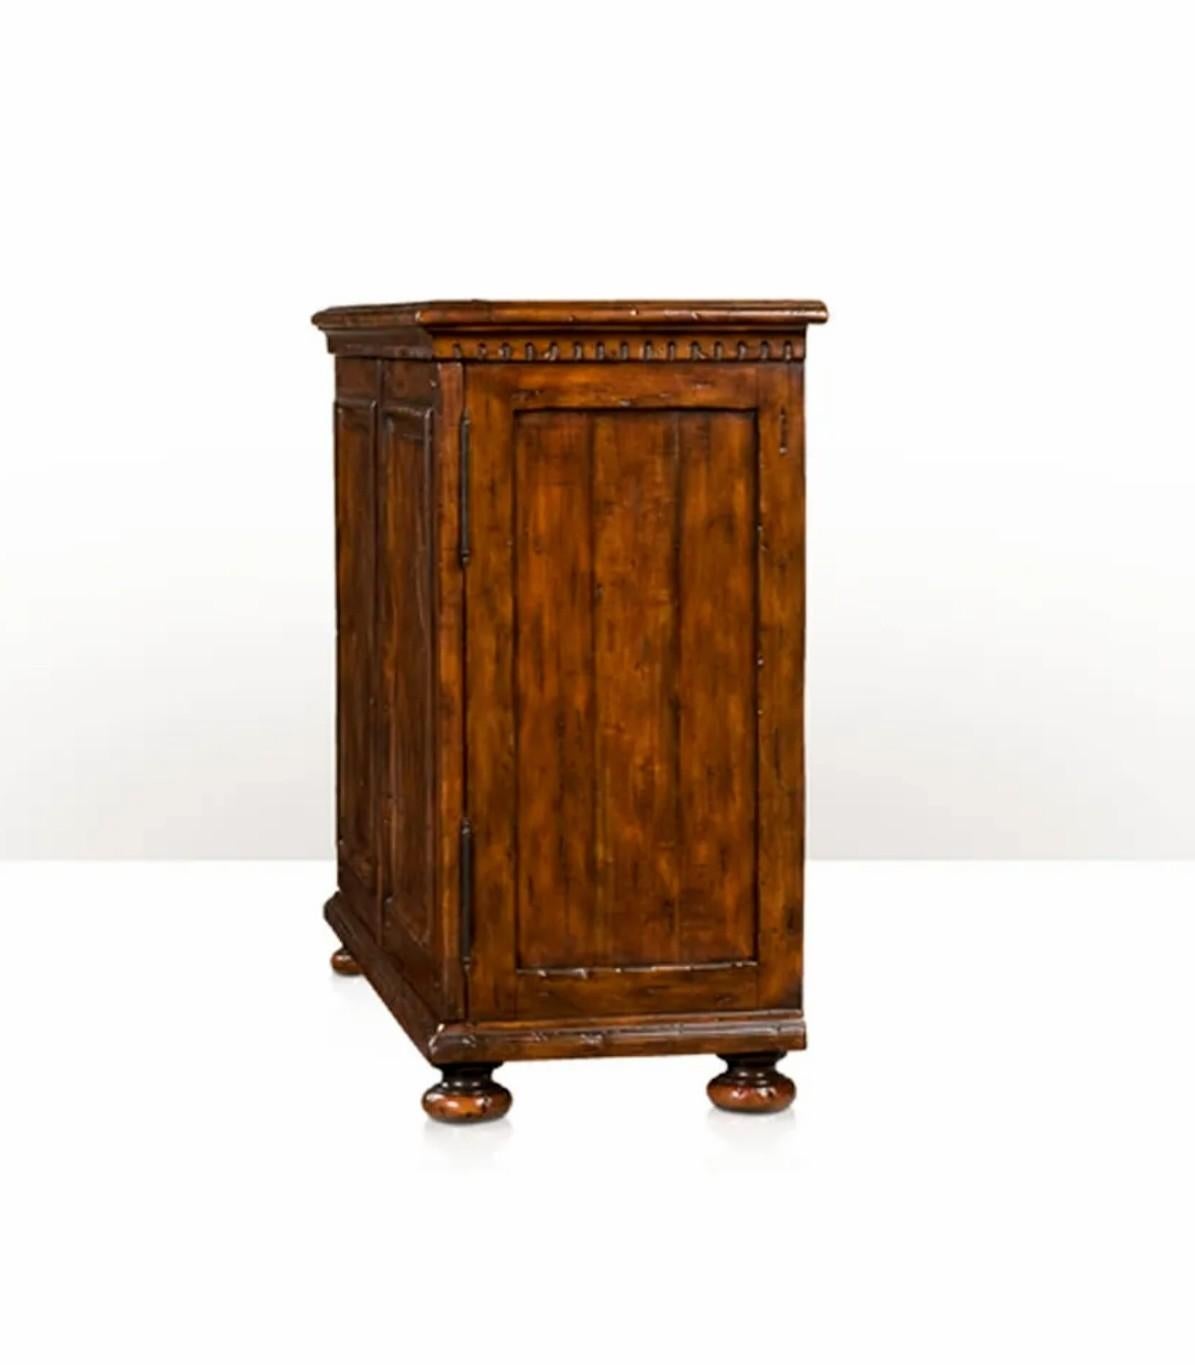 Victorian Theodore Alexander Sir John's Castle Bromwich Antique Mahogany Parquetry Cabinet